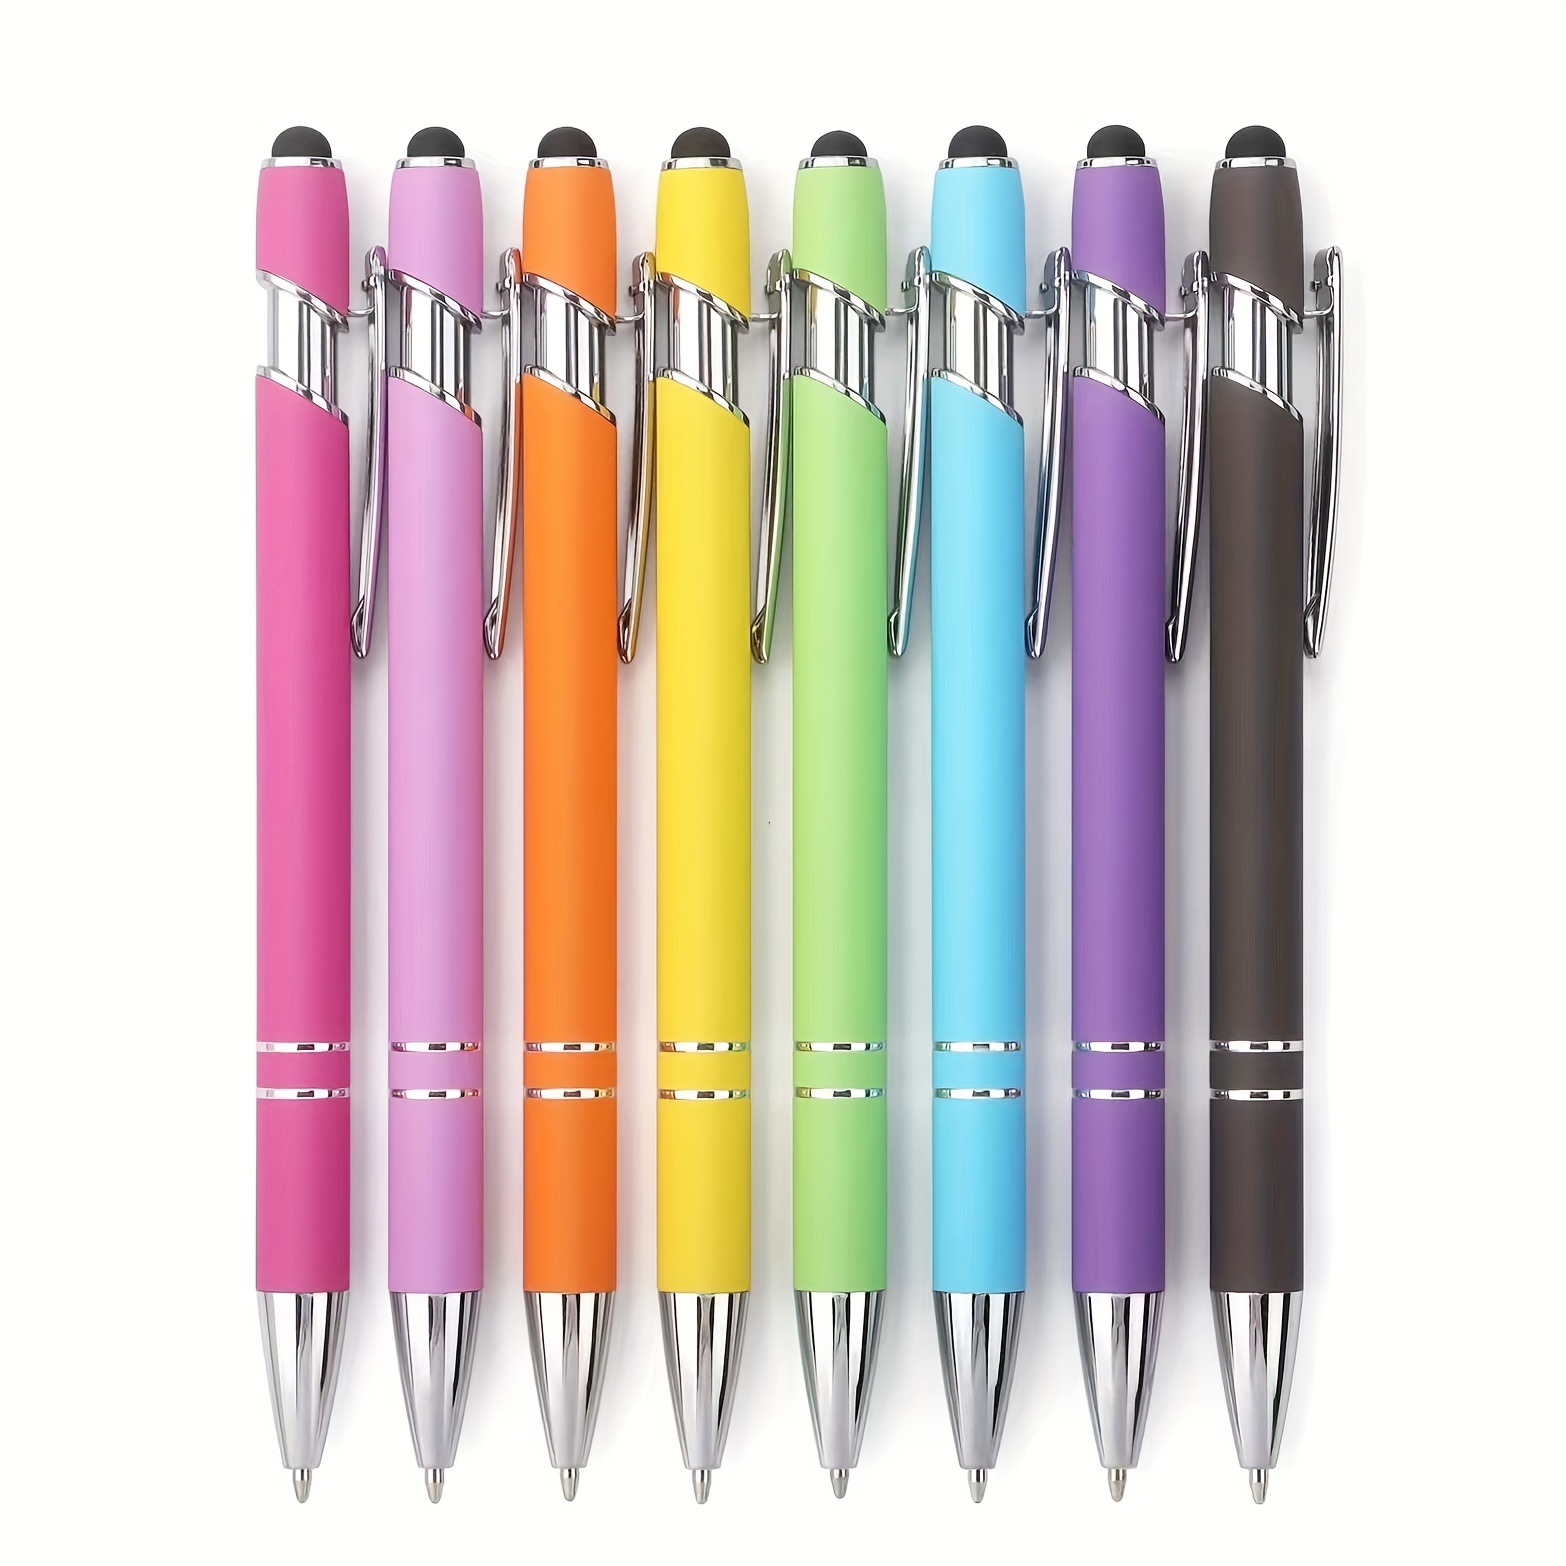 

2-in-1 Retractable Ballpoint Pen & Stylus Combo - Metal Stylus For Touch Screen & 1.0mm Black Ink - 8 Pack (mixed Colors)